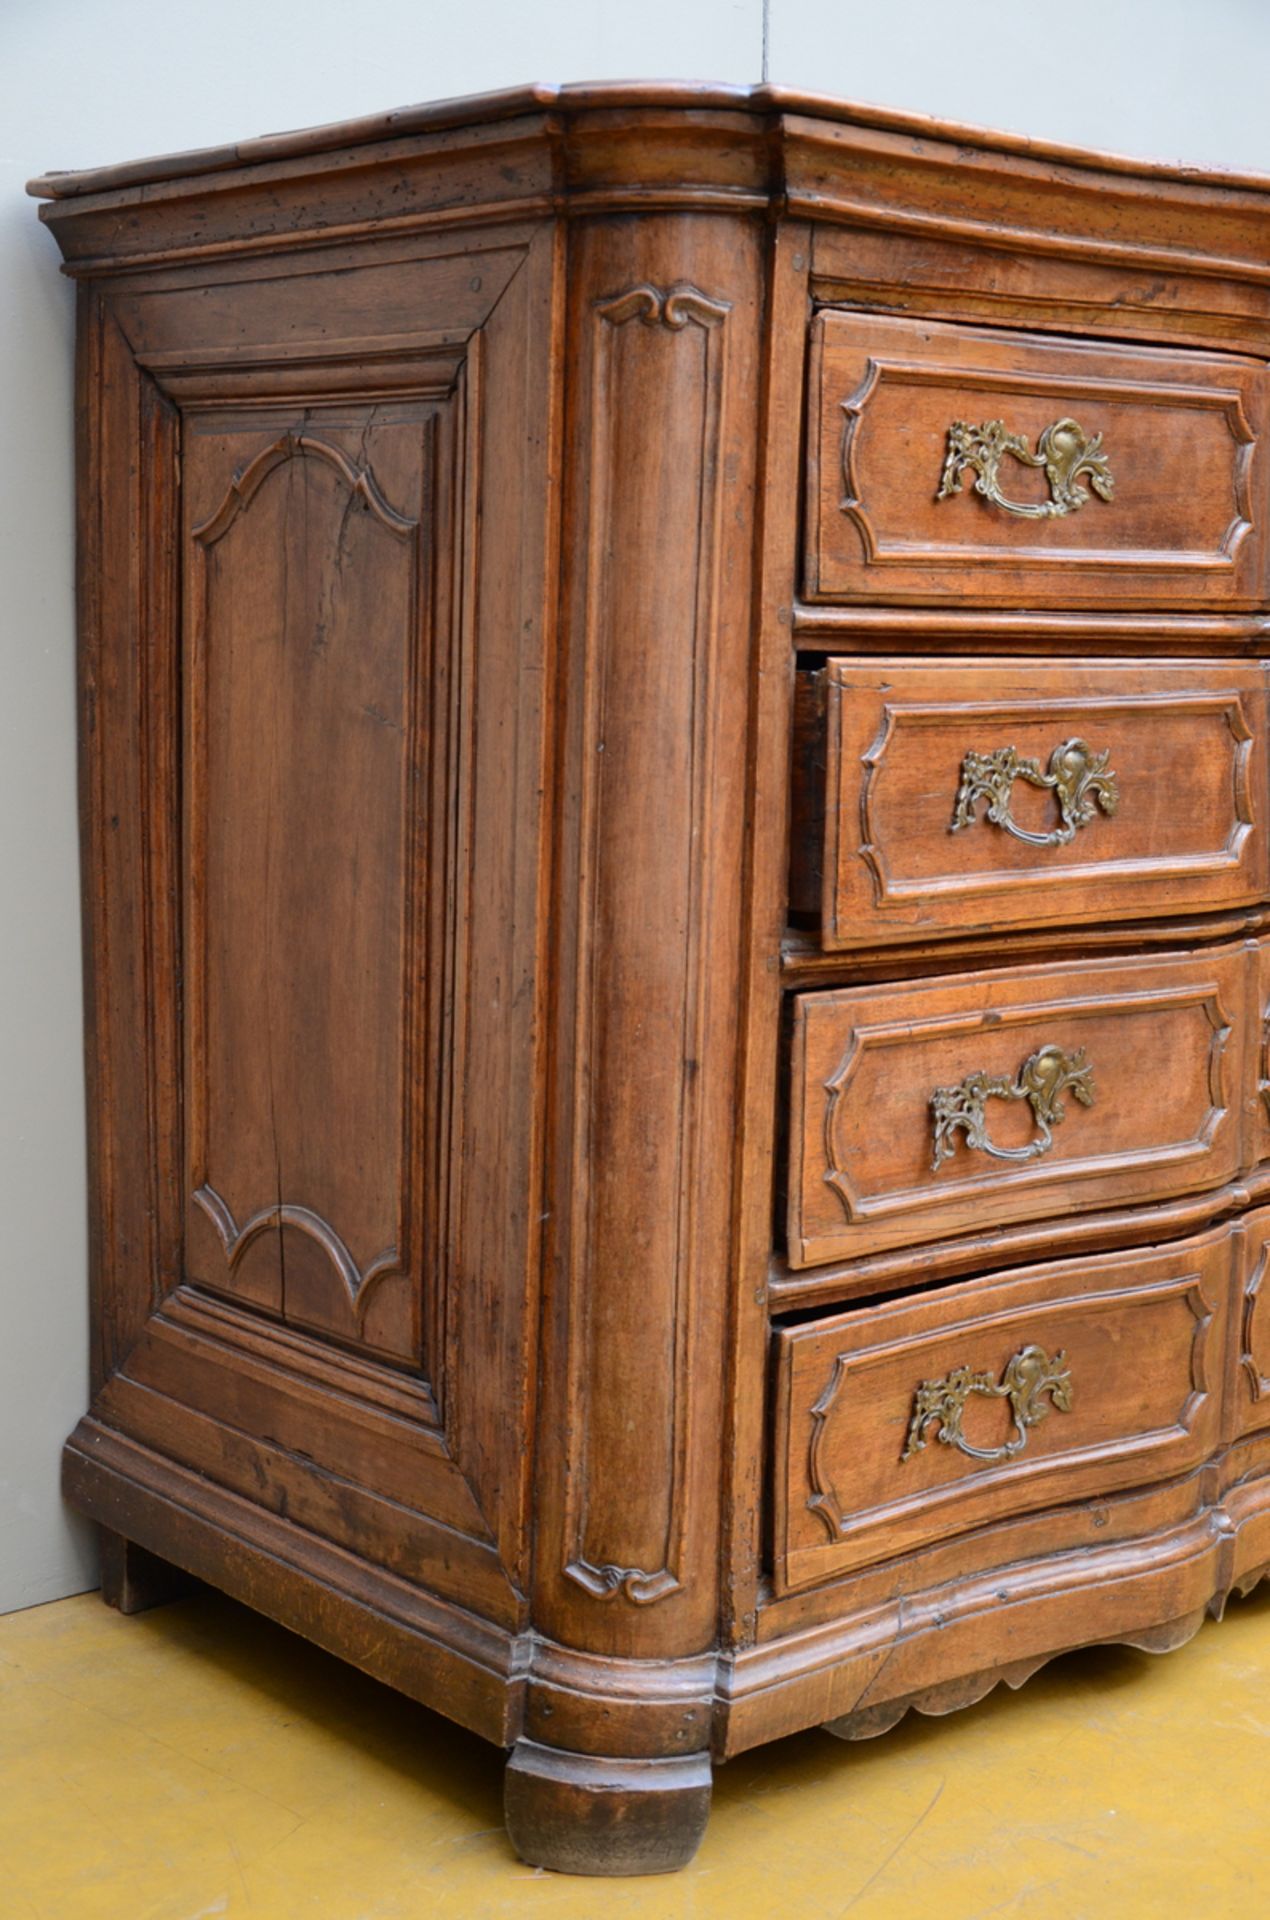 French chest of drawers in walnut, 18th century (64x137x96cm) - Image 2 of 4